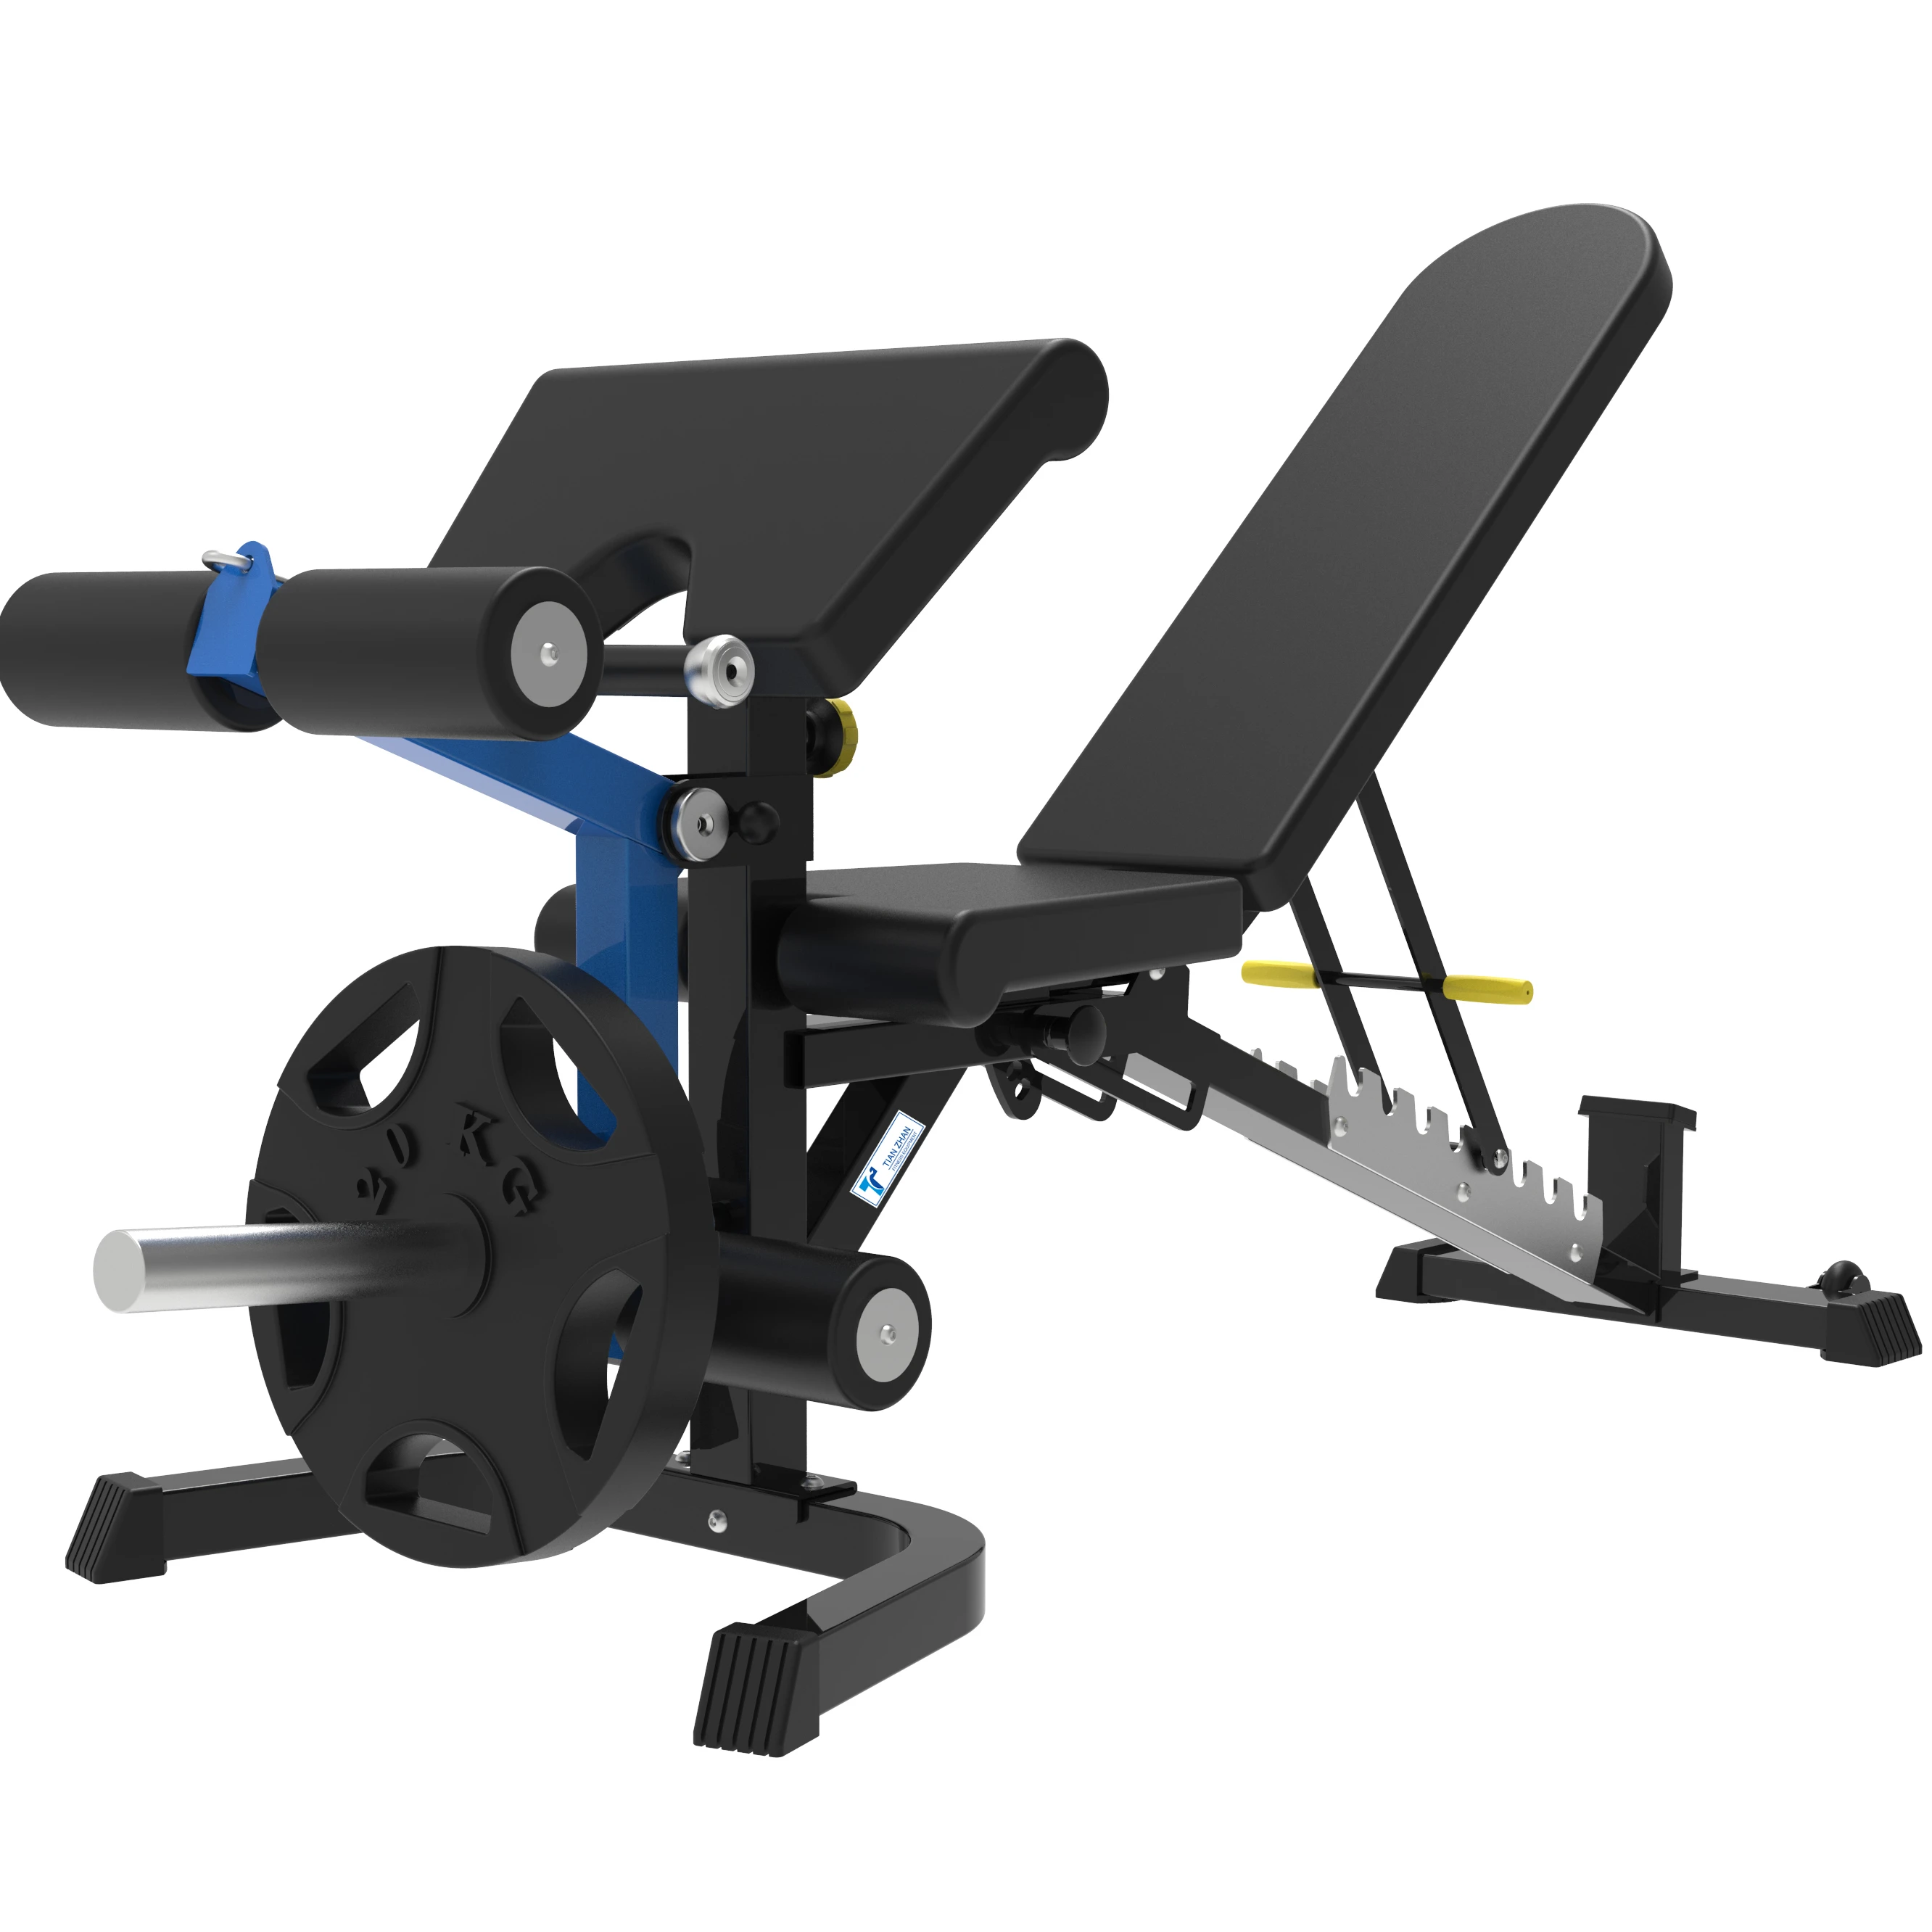 

High quality Mult-Functional Bench fitness functional bench home gym equipment bench, Optional